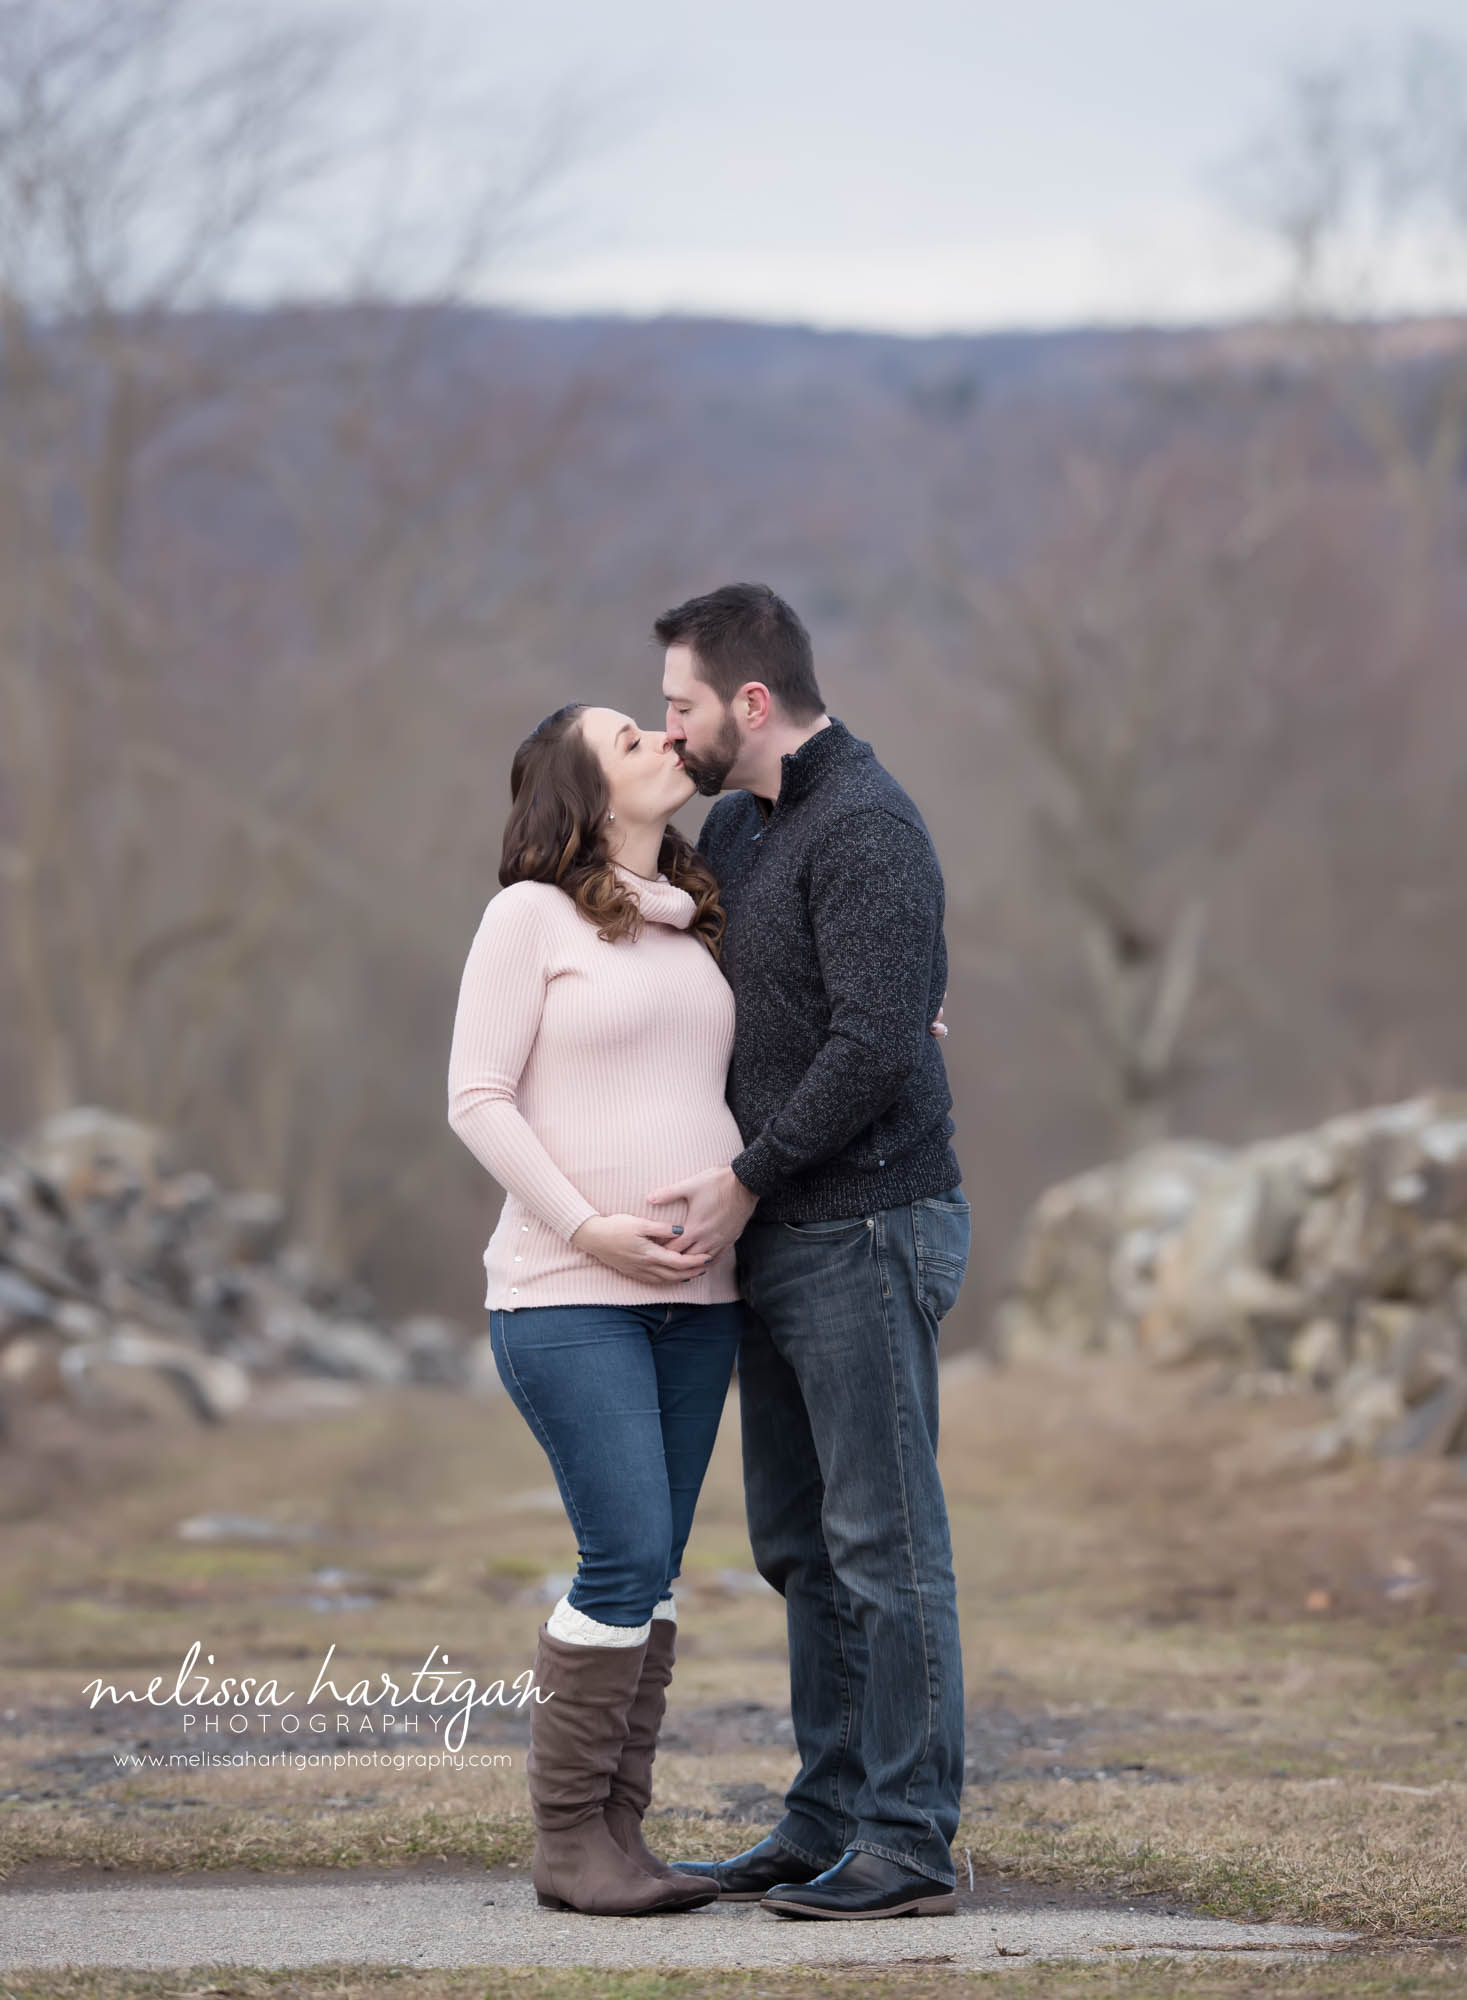 pregnant mom and dad-to-be kissing maternity photography Connecticut